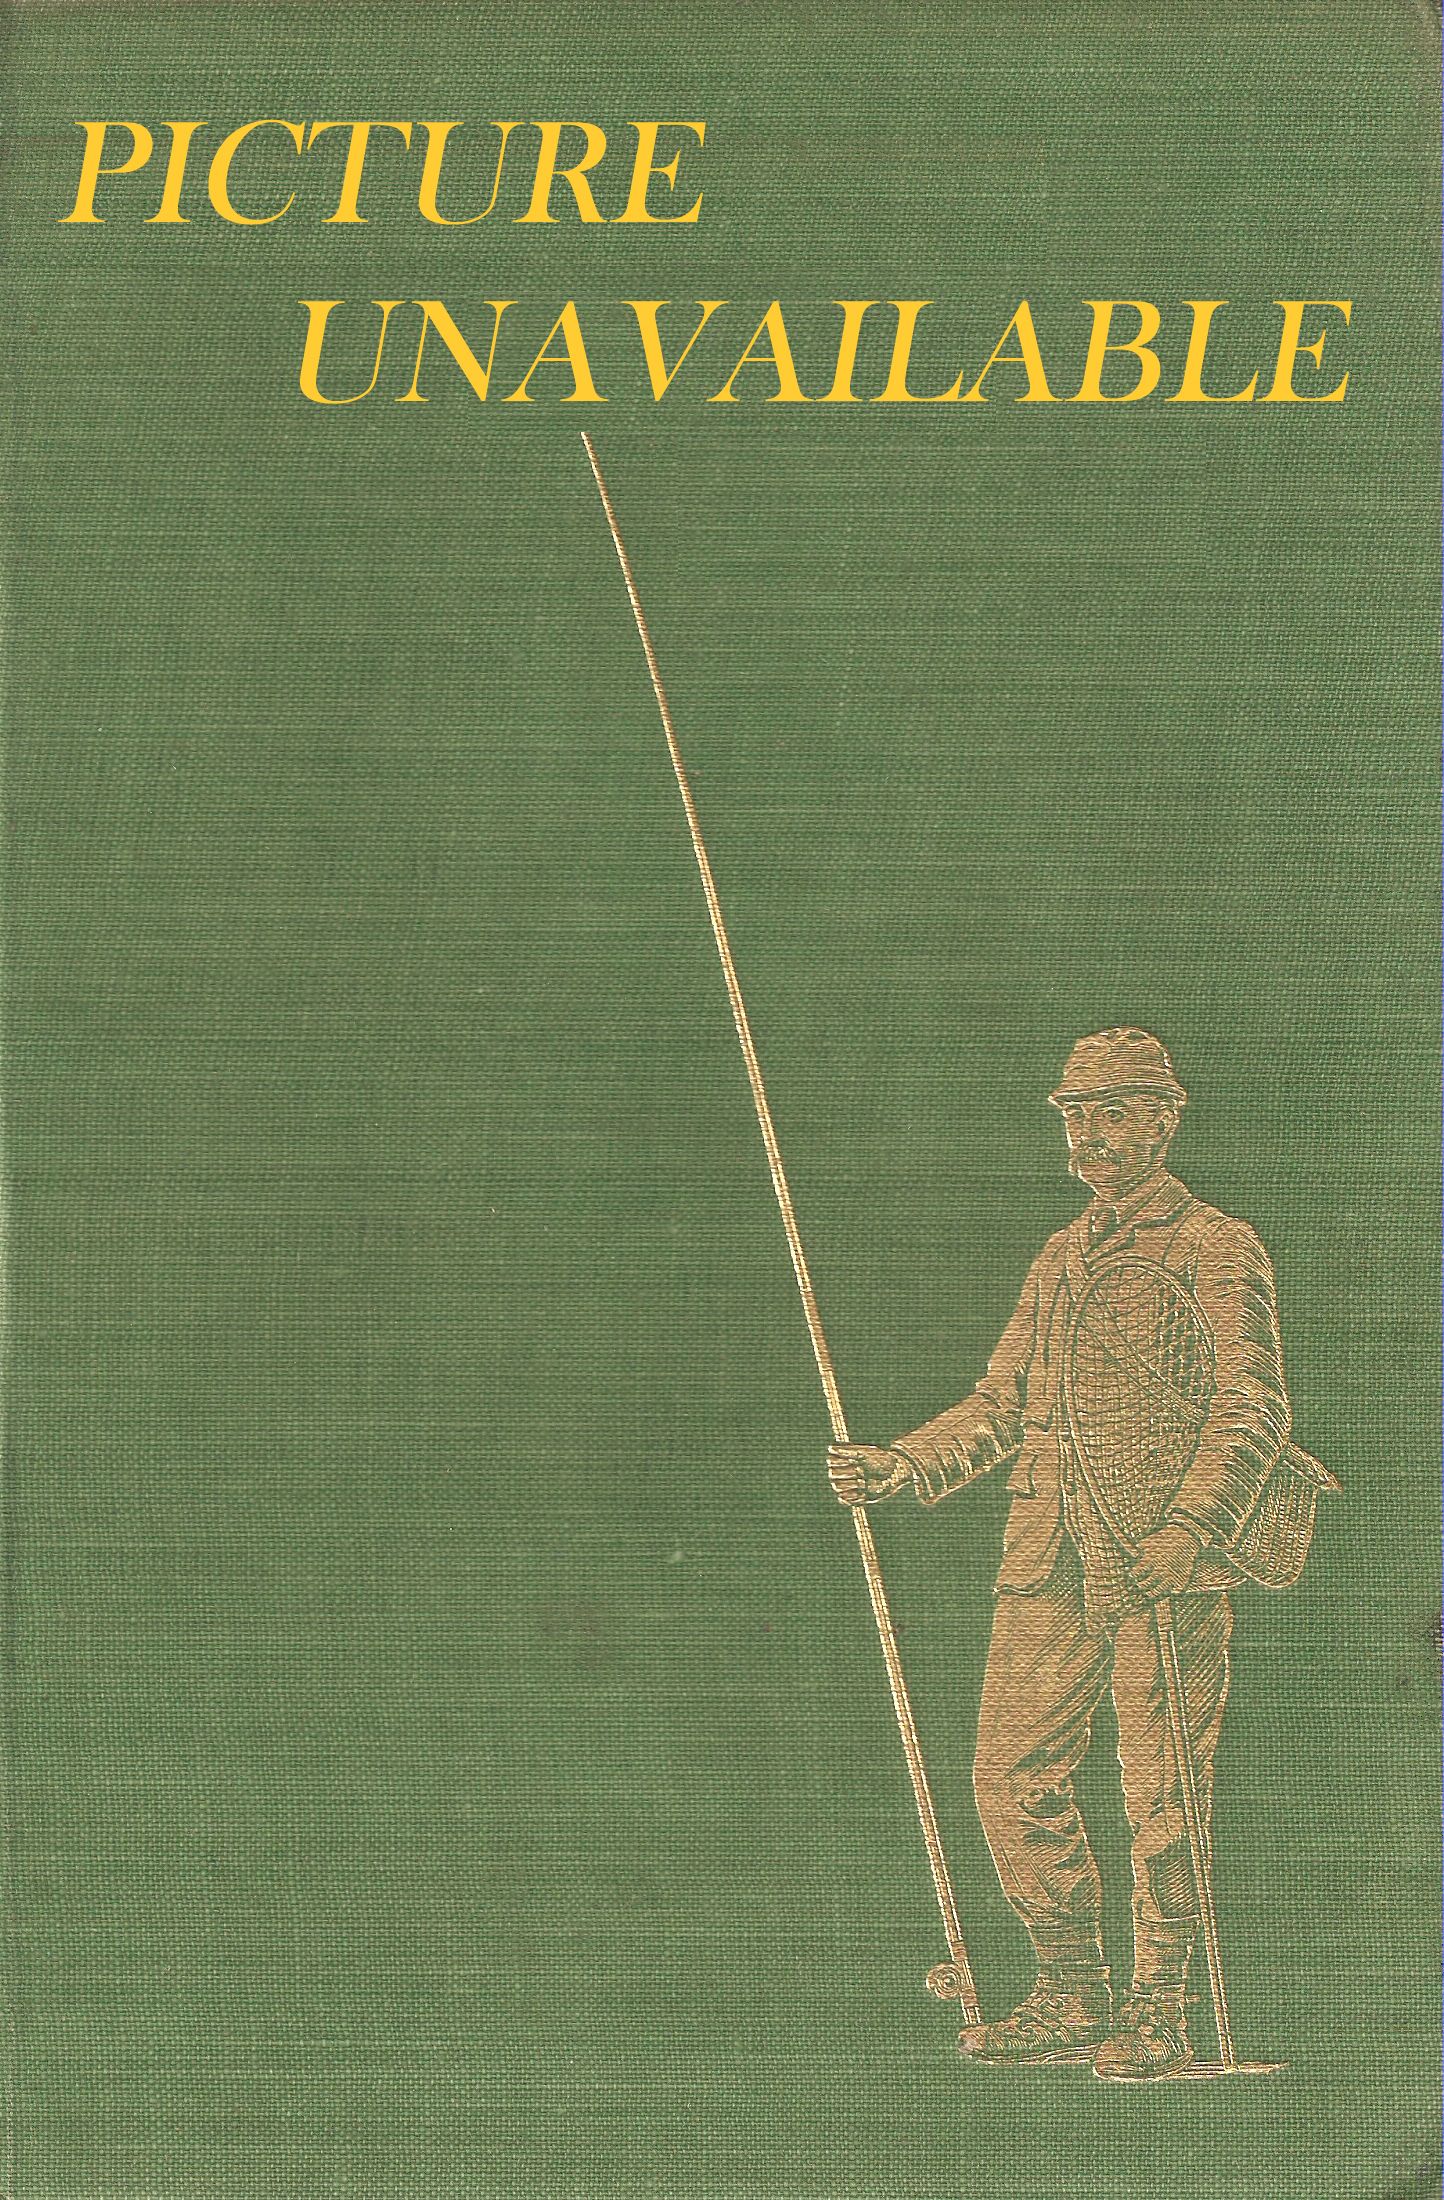 FISHINGS IN SCOTLAND 1949: A POCKET GUIDE TO SCOTTISH OPEN FISHING WATERS.  By Archibald Gardner.